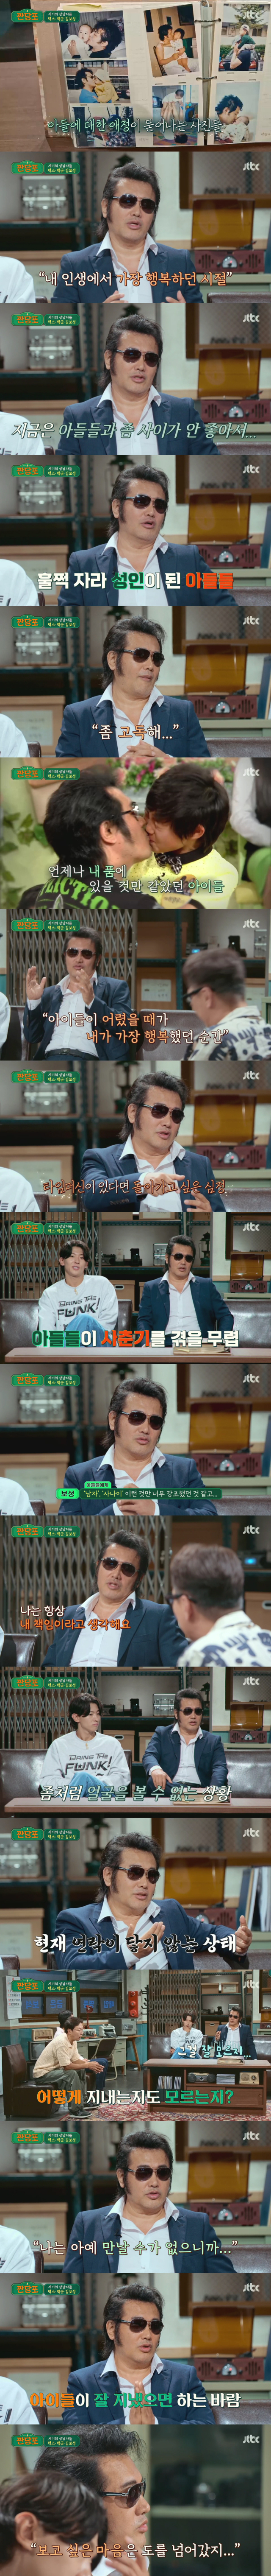 Actor Kim Bo-sung has revealed a painful family history.Yandex Search, Park, and Kim Bo-sung appeared on JTBC woven sugar cloth, a comprehensive channel broadcast on the afternoon of the 12th.On the show, Kim Bo-sung selected the family album as the item to be entrusted to the woven sugar cloth. He then released photos showing his affection for the two sons, explaining, That was the happiest time of my life.It was a happy time... Ive been biting and sucking and now I dont like the Sons and No Strings Attached... Every time I see an album, my heart hurts... he confessed.Yoon Jong Shin said, But it is not easy to be son, father and No Strings Attached. Tak Jae-hun said, Yes, I understand that mind.Kim Bo-sung added, Im a little lonely... When the children were young, it was the happiest moment for me, so I really want to go back if I have a time machine.Yoon Jong Shin said, Since when do you think the sons and No Strings Attached are a little far away? Kim Bo-sung said, Its been like that since puberty.The fact that No Strings Attached has gotten worse isnt just... brusque, its... its okay with my mom, but... its a little vague to go into details.I want to talk about it in detail when I open it, but when the children see it, they say, Why do they talk about it on the air like that? Because there are things like that. Also, if you talk about it in detail, the sons can feel bad because they are adults.Yoon Jong Shin said, Why did you keep bumping into the sons?Kim Bo-seok said, There is a complex reason, but I think I have stressed too much about men and male to the sons ... So the conversation is rather out of place ... He said, It is a dream to live with the sons and ordinary Wealthy No Strings Attached. Yoon Jong Shin then asked, Is it your fault that you became estranged from your children? Kim Bo-sung said, I always think its my responsibility. I wouldnt have been perfect again, because Father is the first.Theres something else Ive done wrong, he said.Yoon Jong Shin also said, How far away is No Strings Attached? Do you live together now or do you live out of your kids?Kim Bo-sung hesitated, I do not live together and I am outside. In response, Yoon Jong Shin asked, Cant I get an answer if I send a text message? Kim Bo-sung replied, Im blocked at all. I cant contact you. Then Tak Jae-hun replied, Dont you even know how youre doing?Kim Bo-sung said, I do not know that well. I am a sick person. Kim Bo-sung then apologized, saying, There is a limit to talking about this on the air... Im afraid youll misunderstand that I talked mainly about myself... Im sorry I couldnt open it.I cant meet them at all, he said. I just hope theyre alive and well. Ive gone too far in my desire to see them.On the other hand, woven sugar cloth is a woven security talk show program that shares a true life story with the stars who left precious things to dang po in the days of woven.